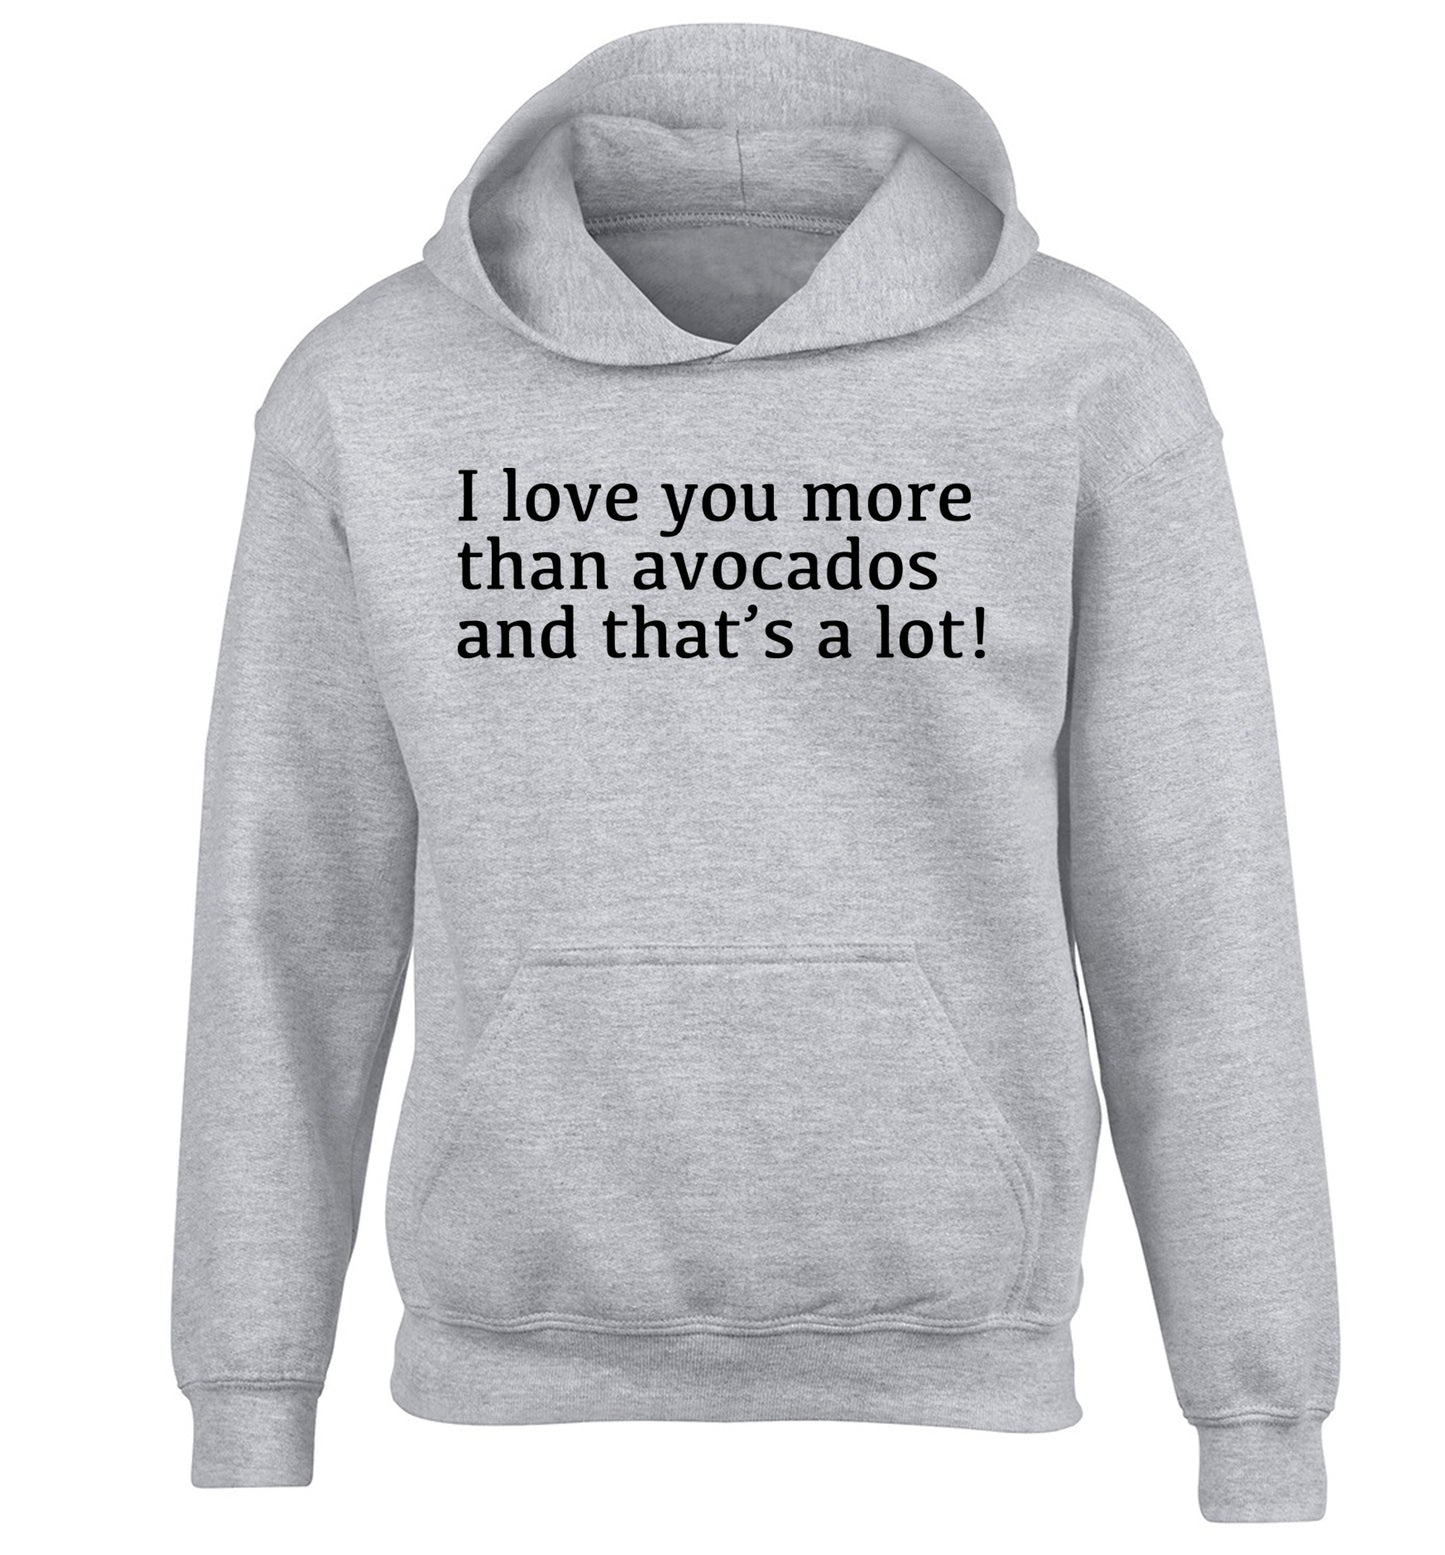 I love you more than avocados and that's a lot children's grey hoodie 12-14 Years